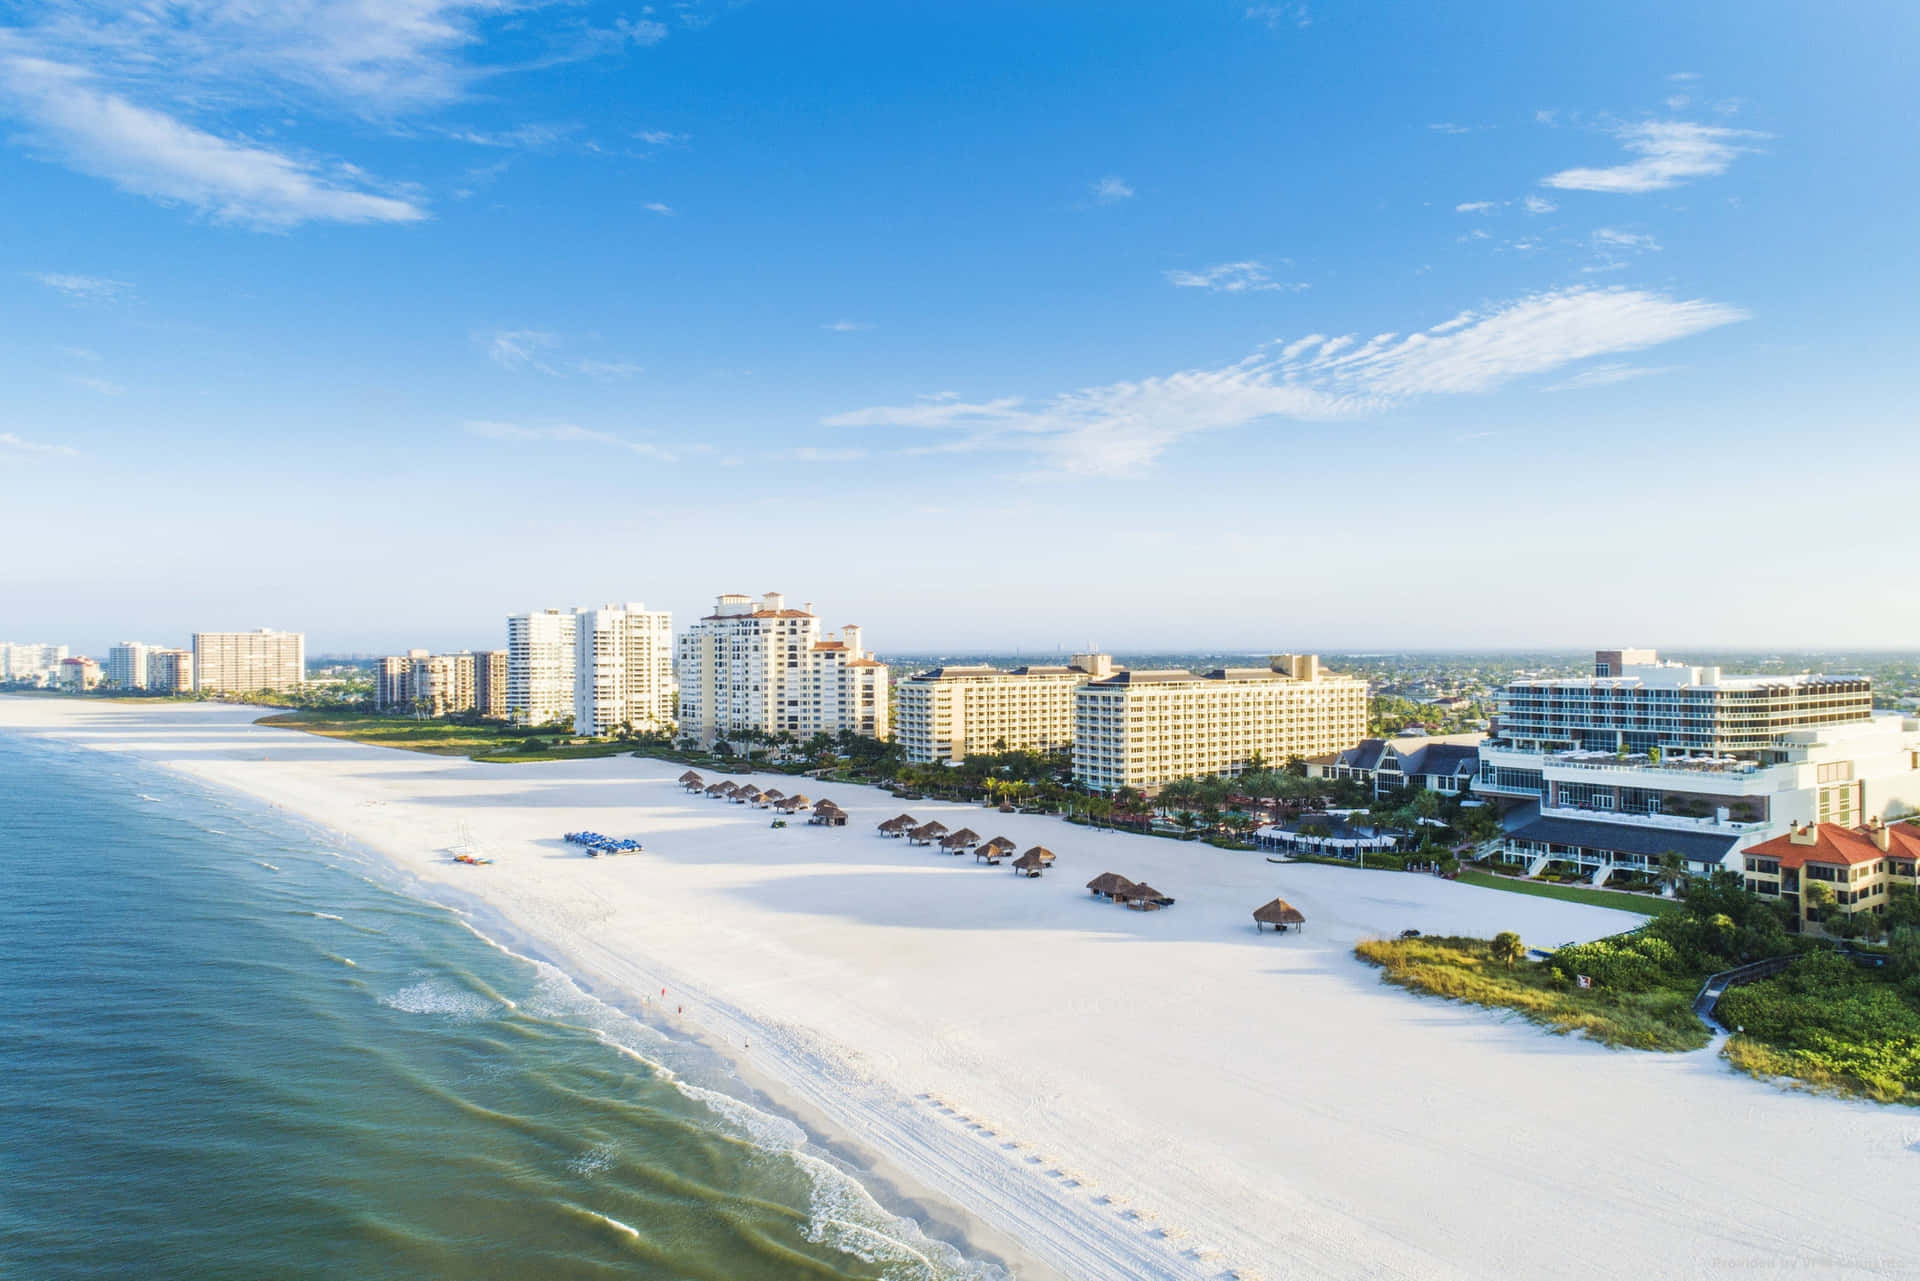 Enjoy the picturesque views of Marco Island, Florida